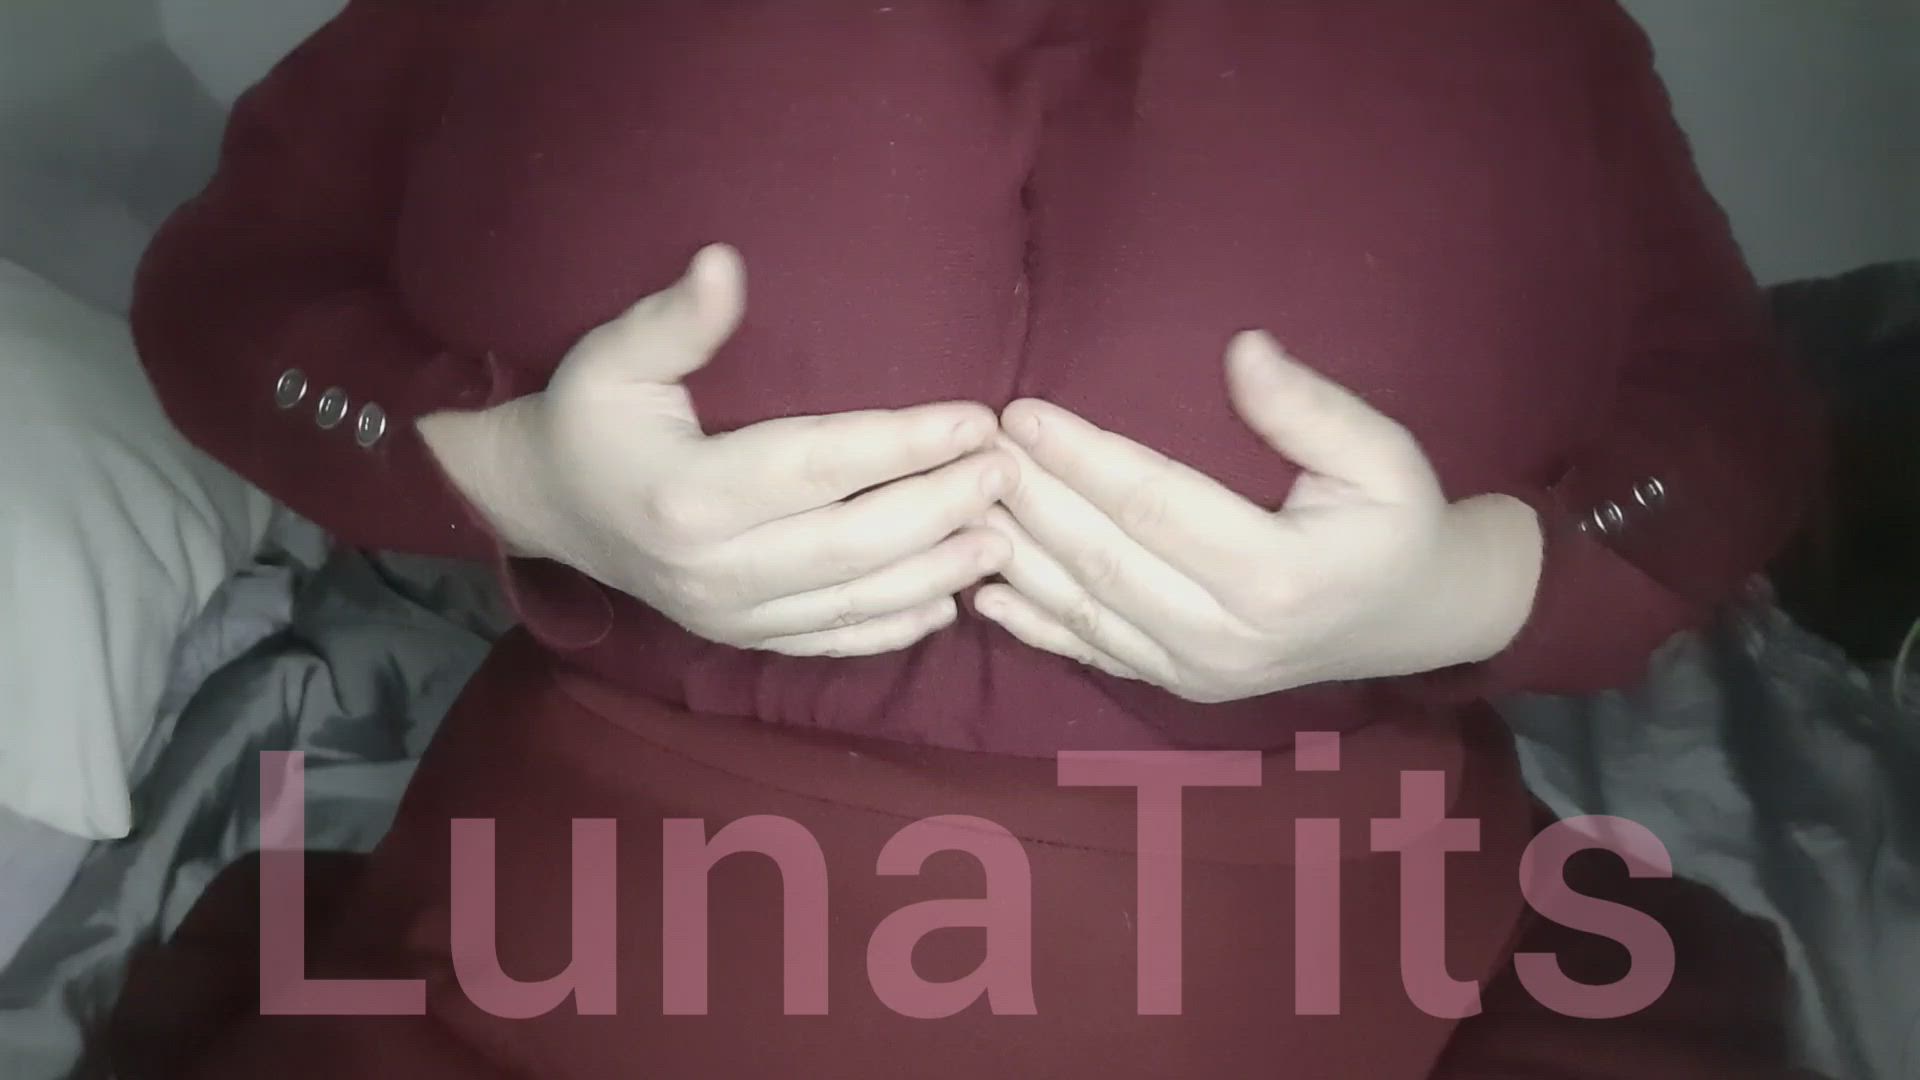 BBW porn video with onlyfans model Luna <strong>@lunatits</strong>